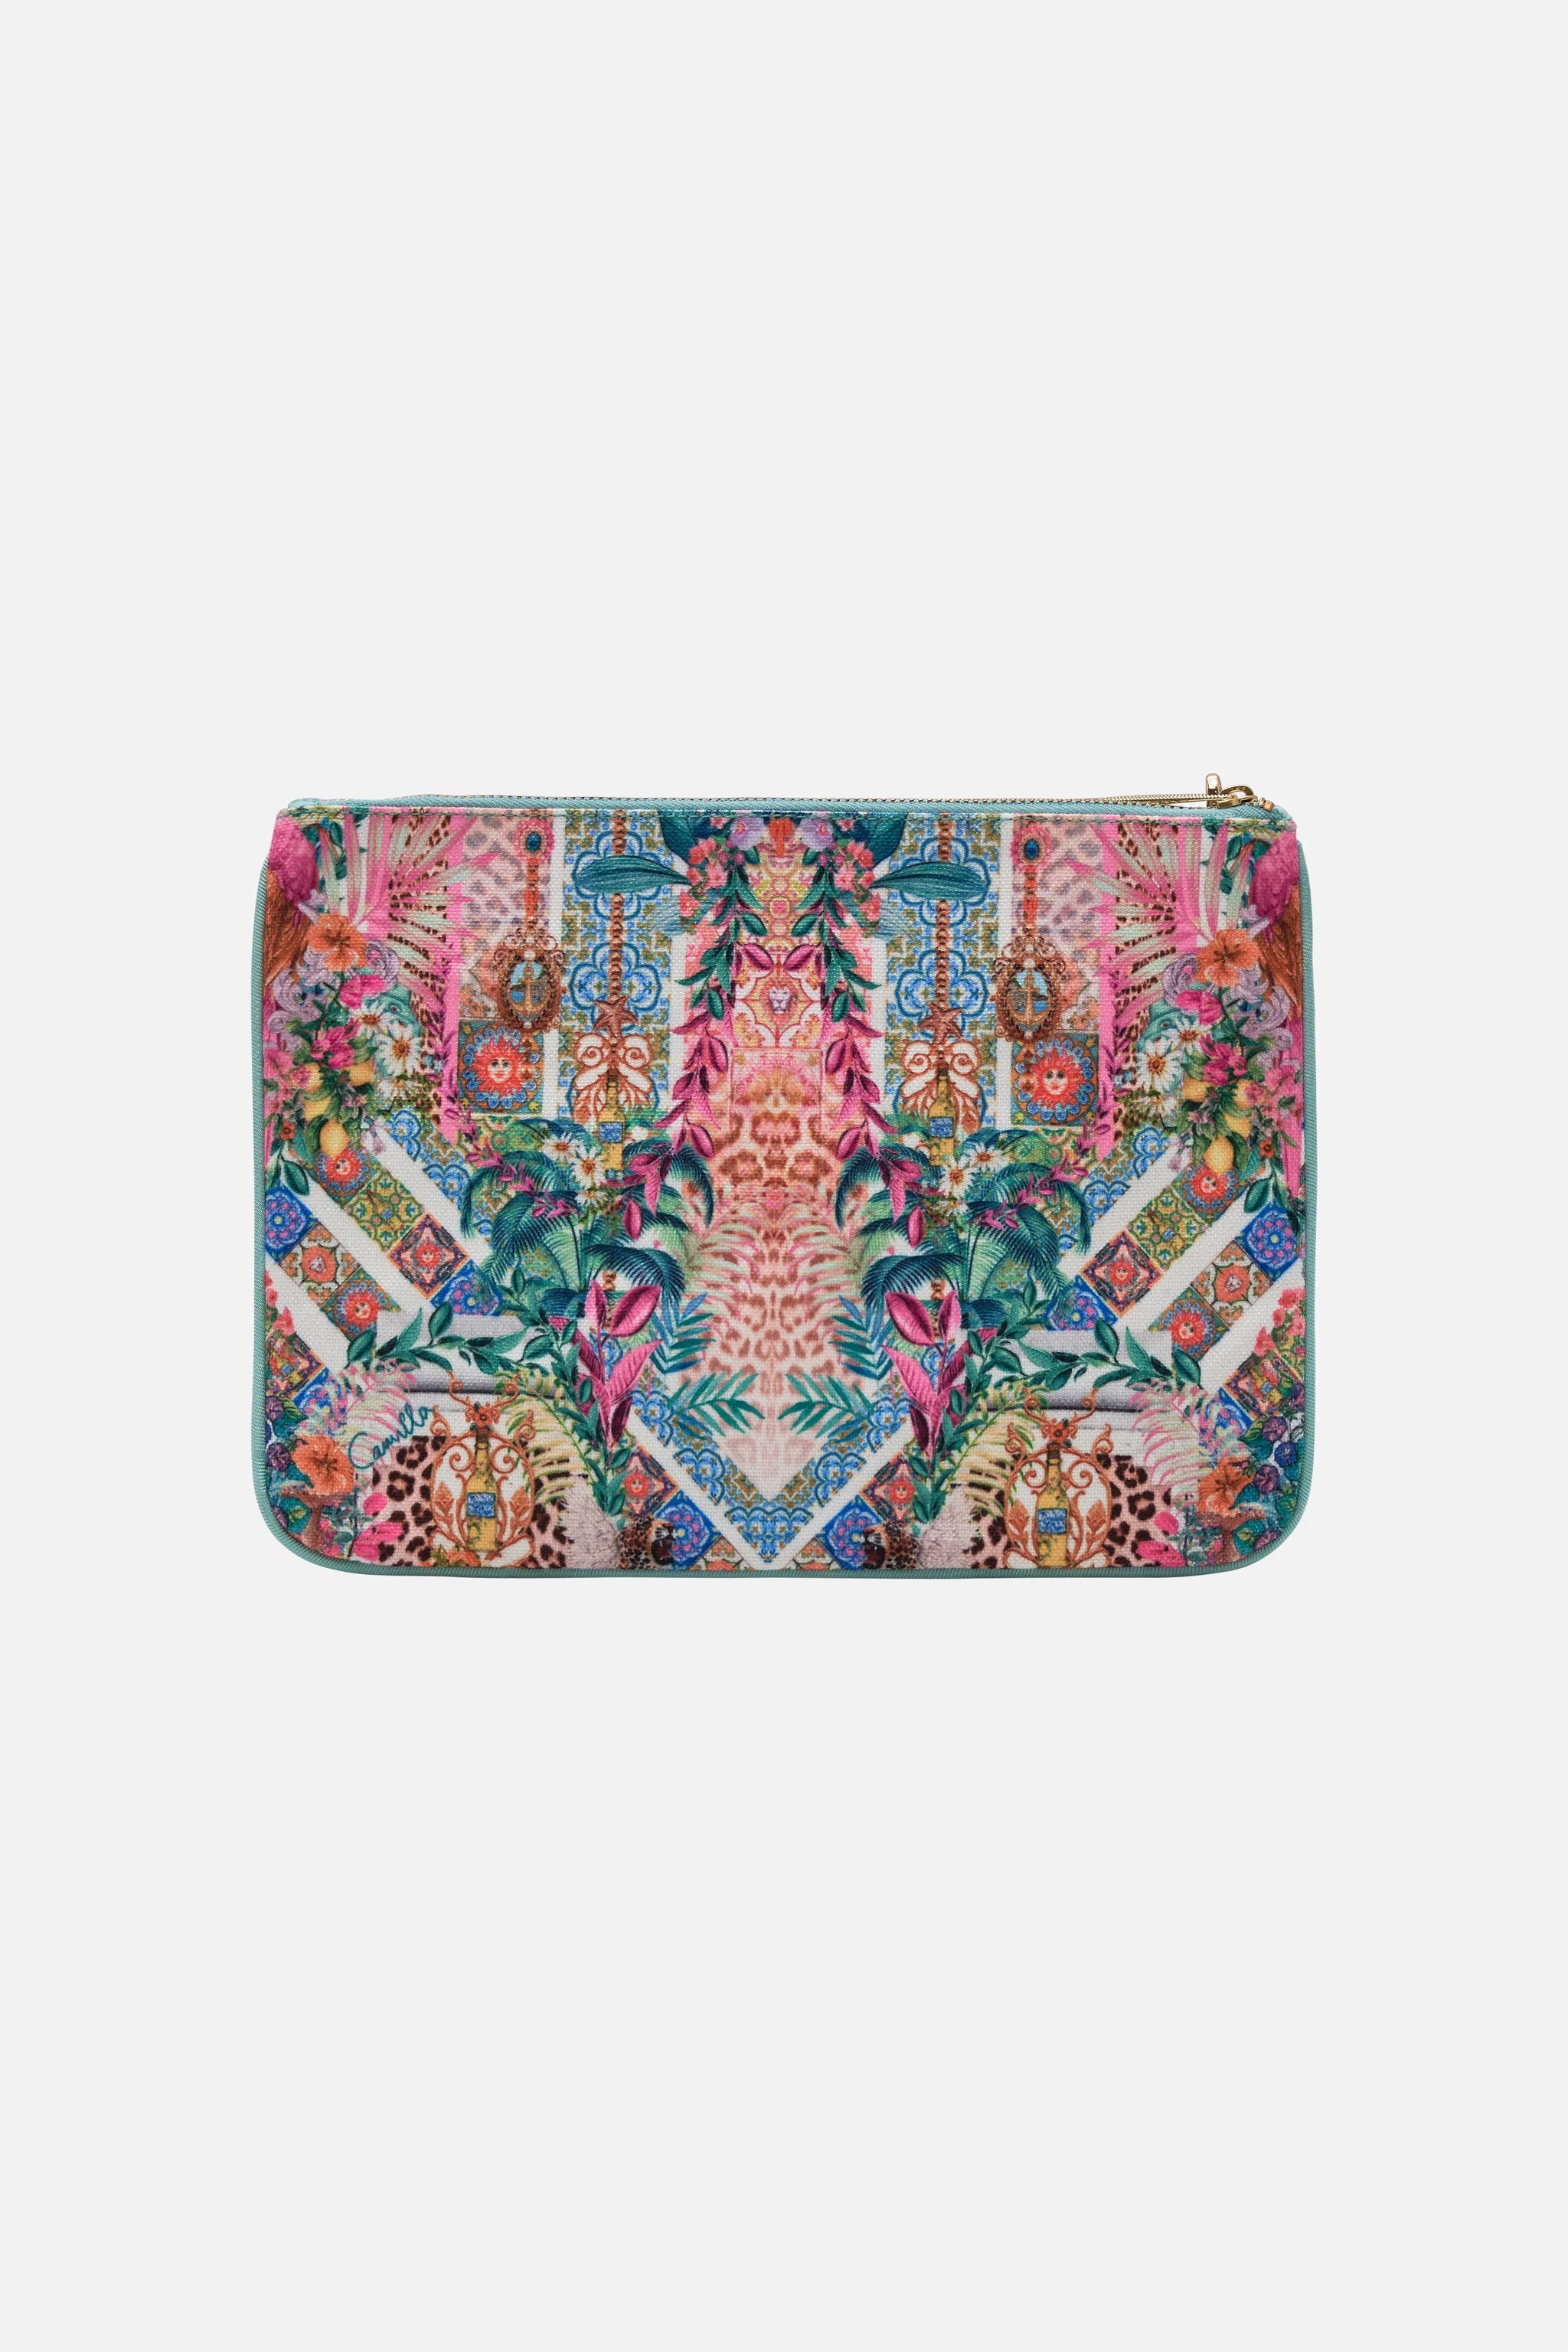 Small Canvas Clutch - Flowers of Neptune